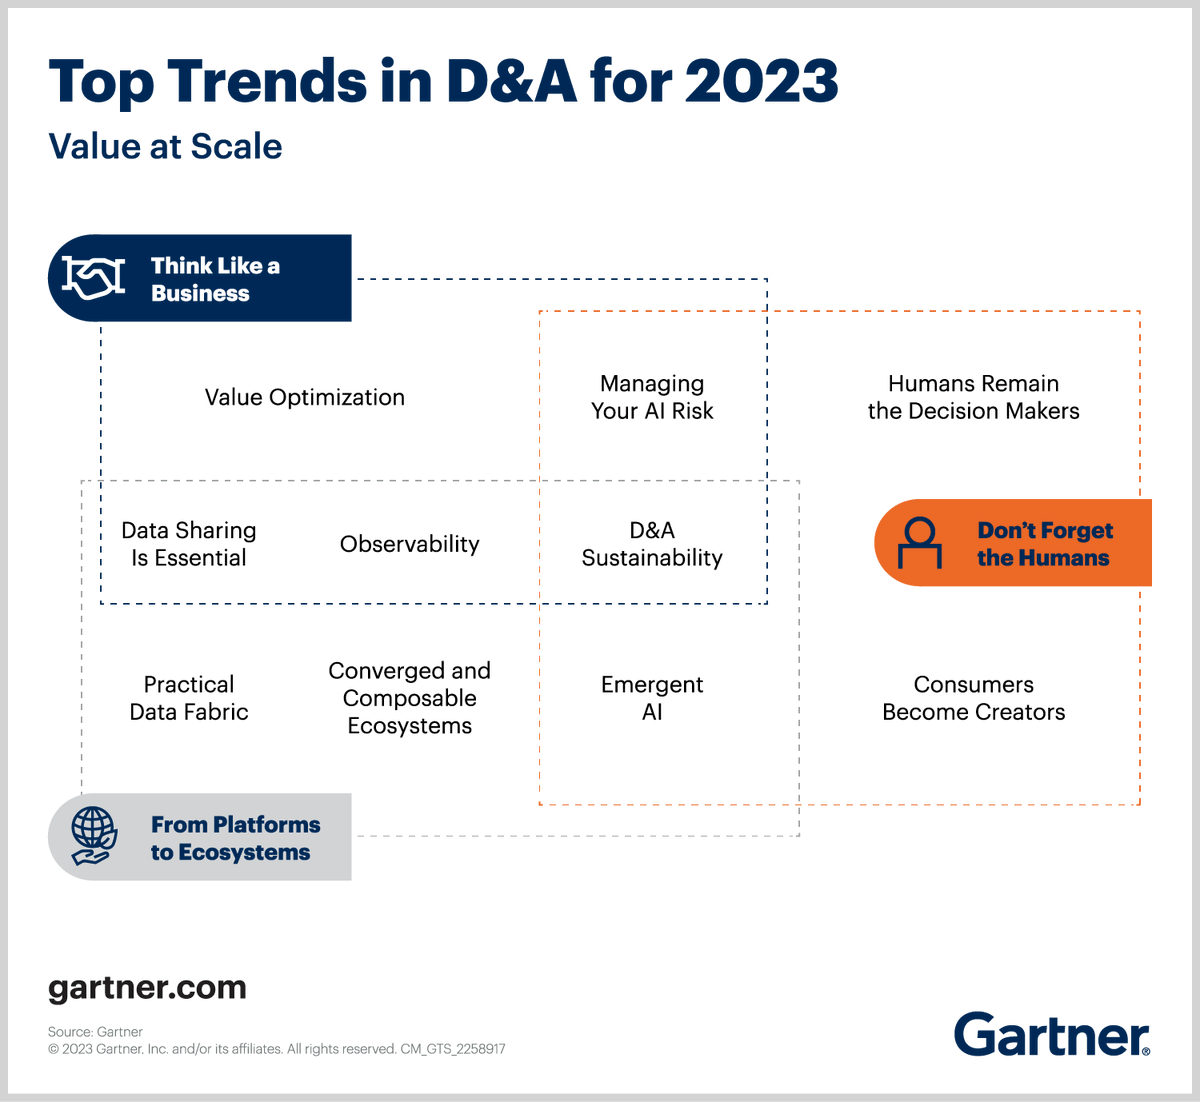 #IN Think like a business but don’t forget the humans.

Here's 10 data and analytics trends to keep on your radar: gtnr.it/3WZ8Yjb 

#GartnerIT #Data #Analytics